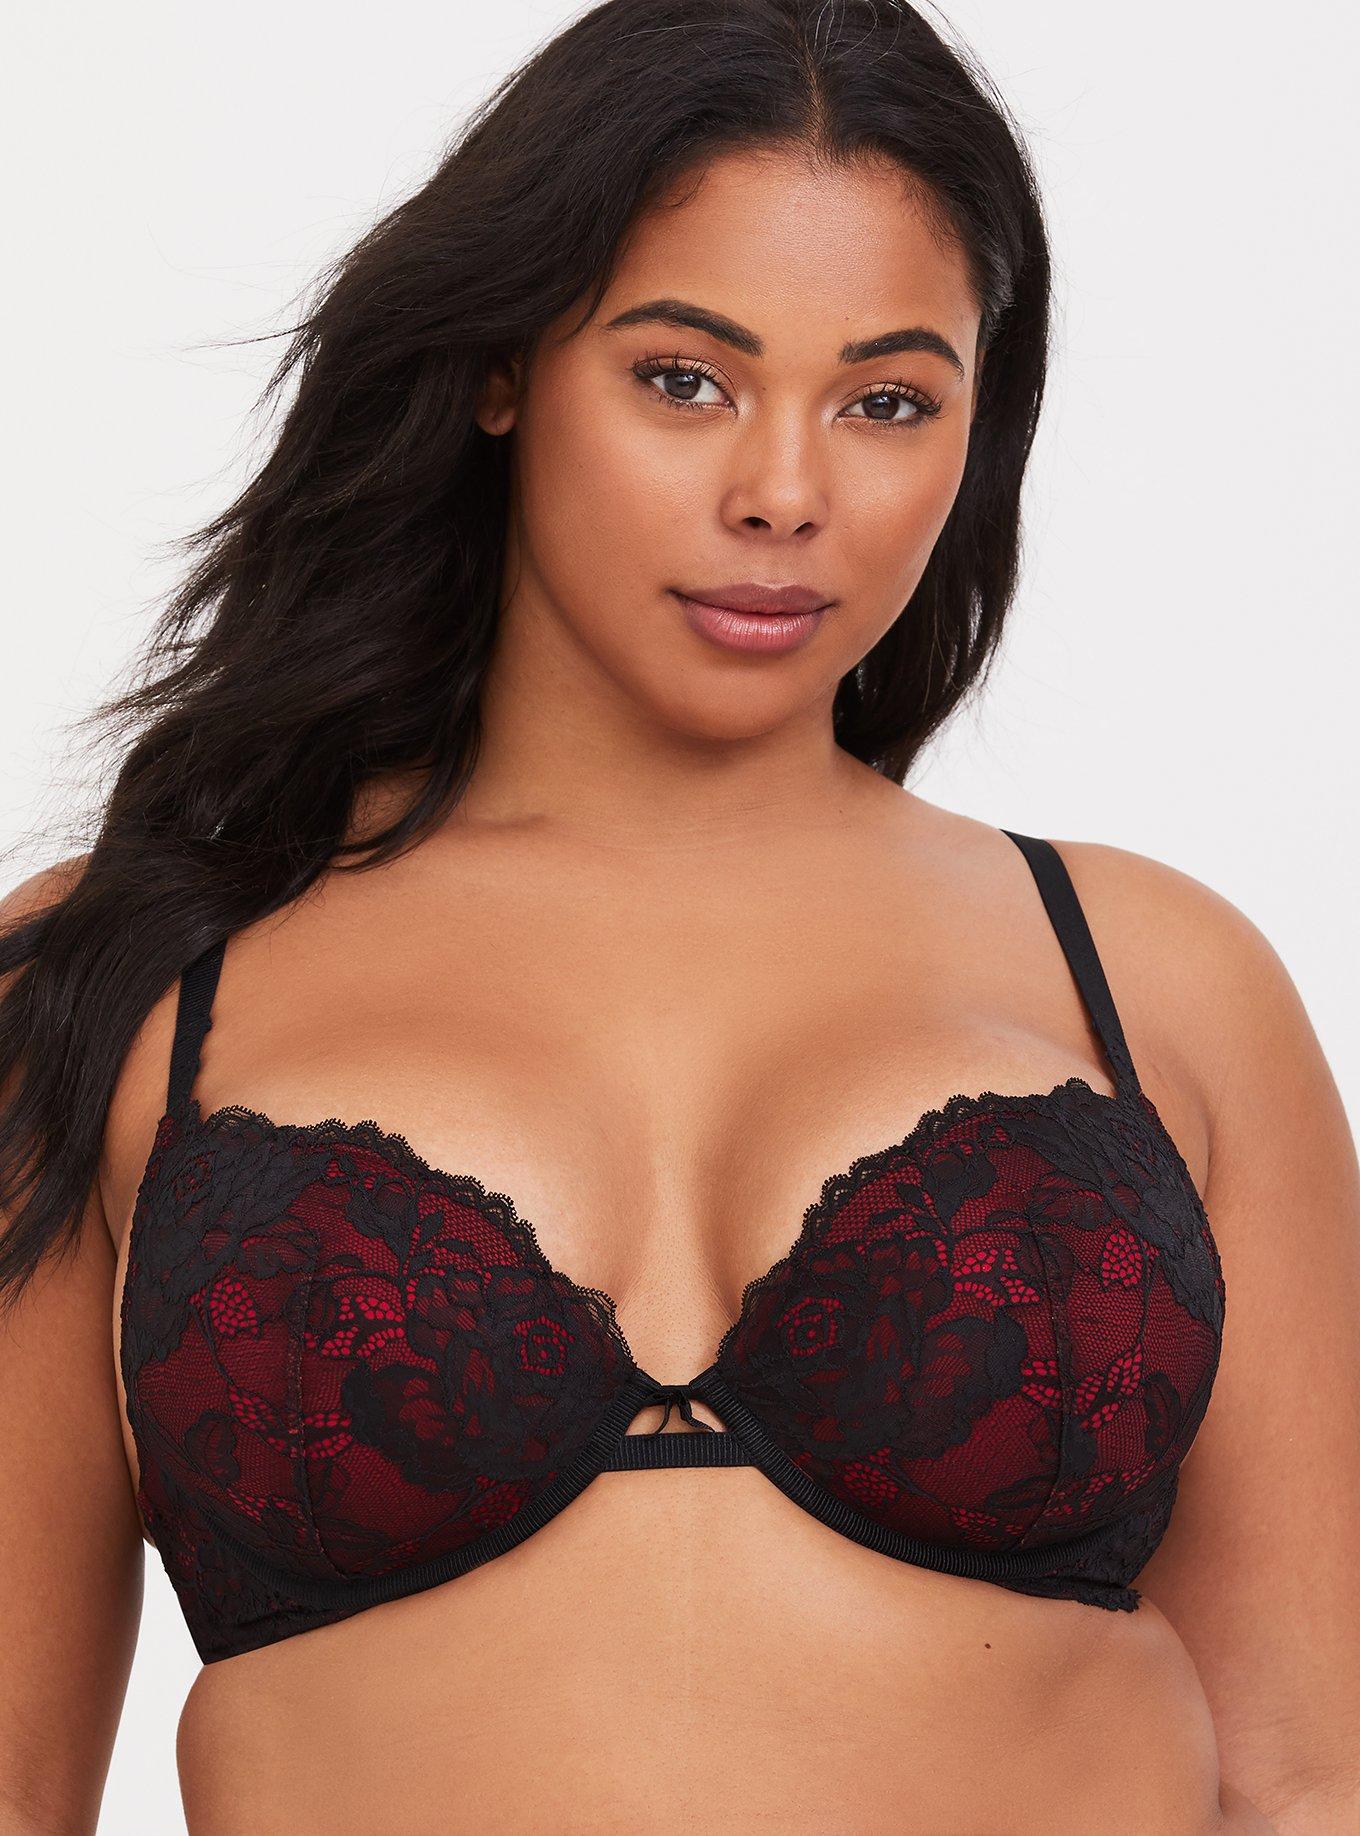 Plus Size - Red Removable Strap Lace Push-Up Plunge Bra - Torrid